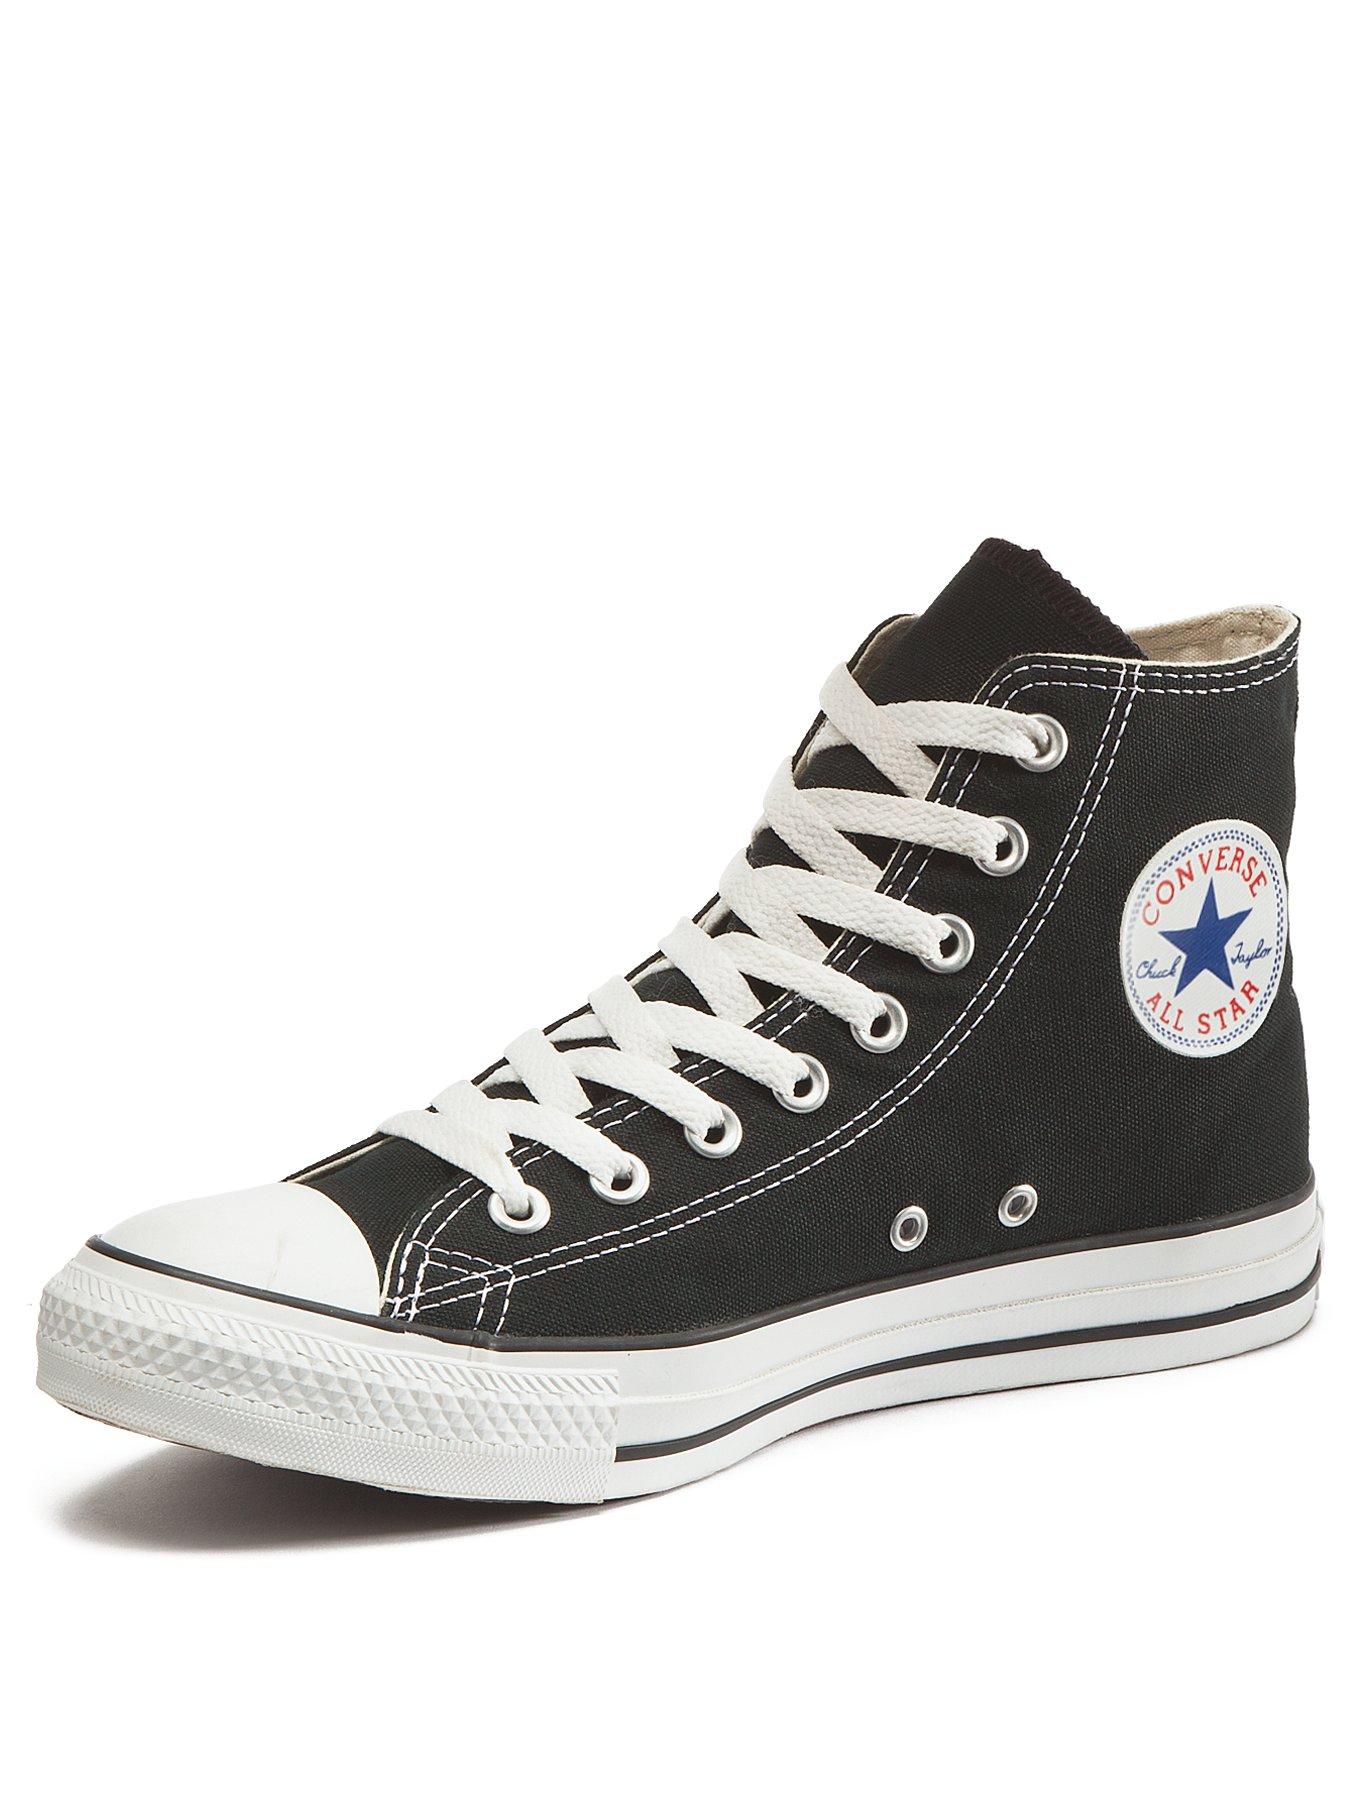 Women's Converse Trainers, & Tops Very.co.uk